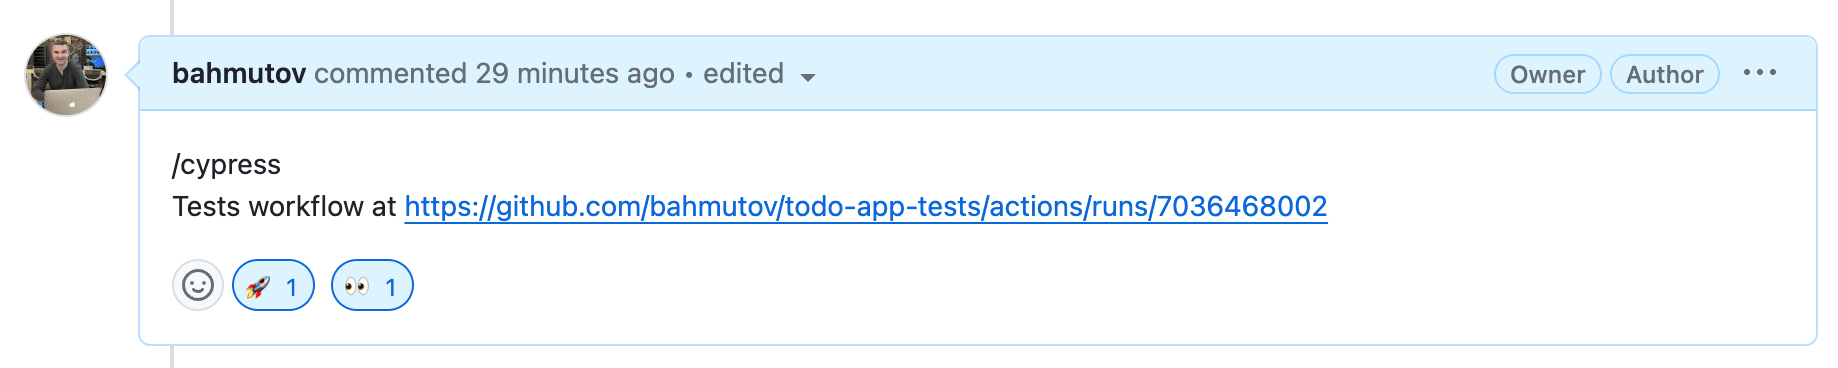 The tests workflow URL is appended to the original slash comment